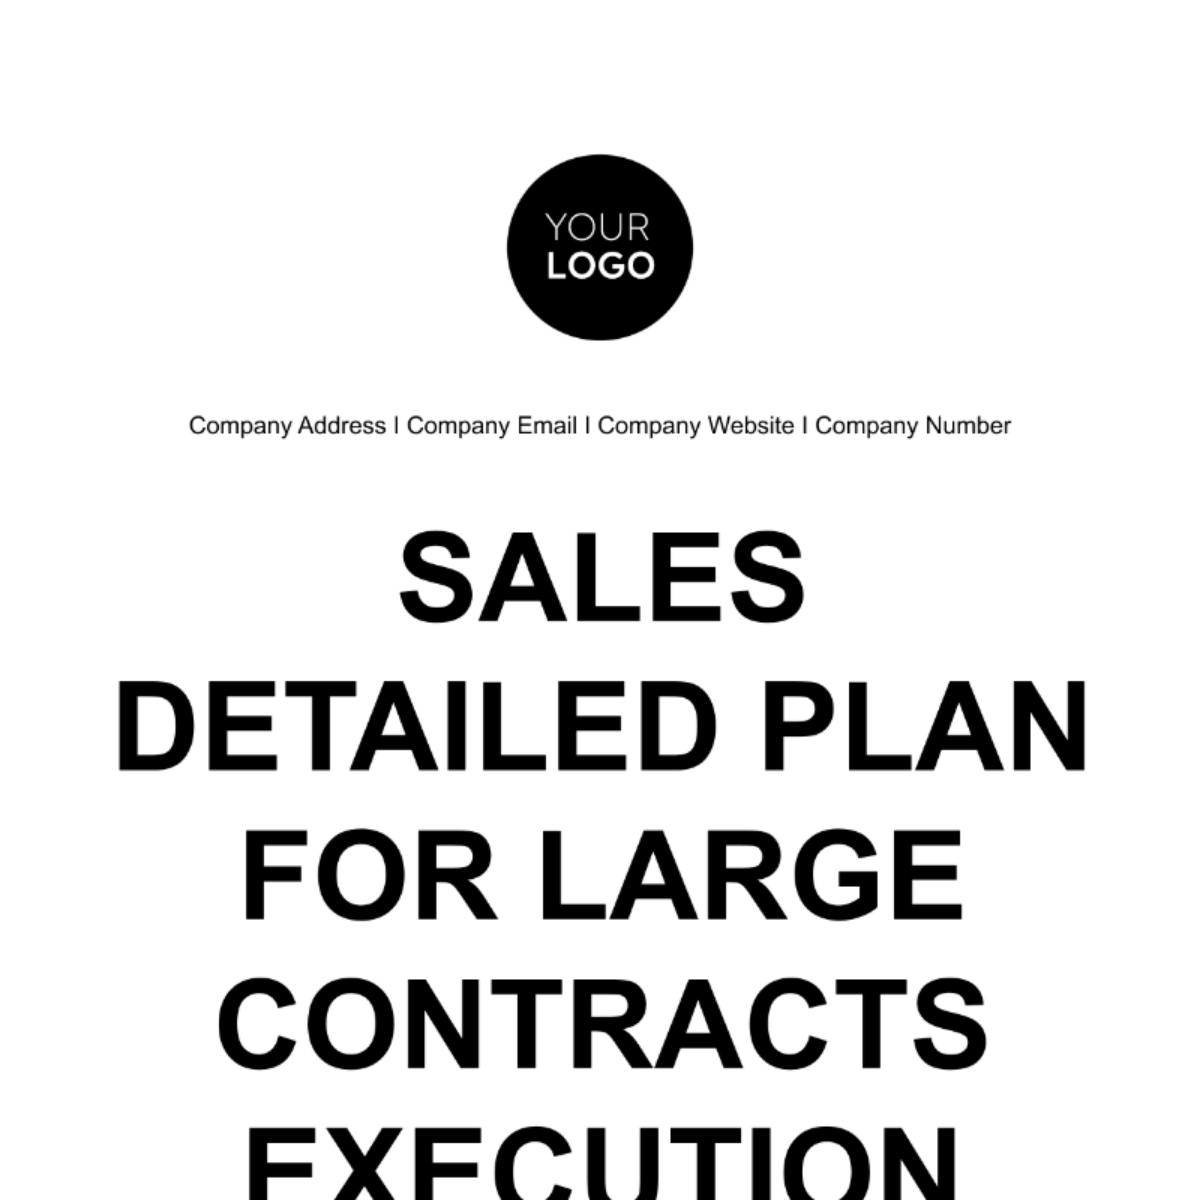 Free Sales Detailed Plan for Large Contracts Execution Template